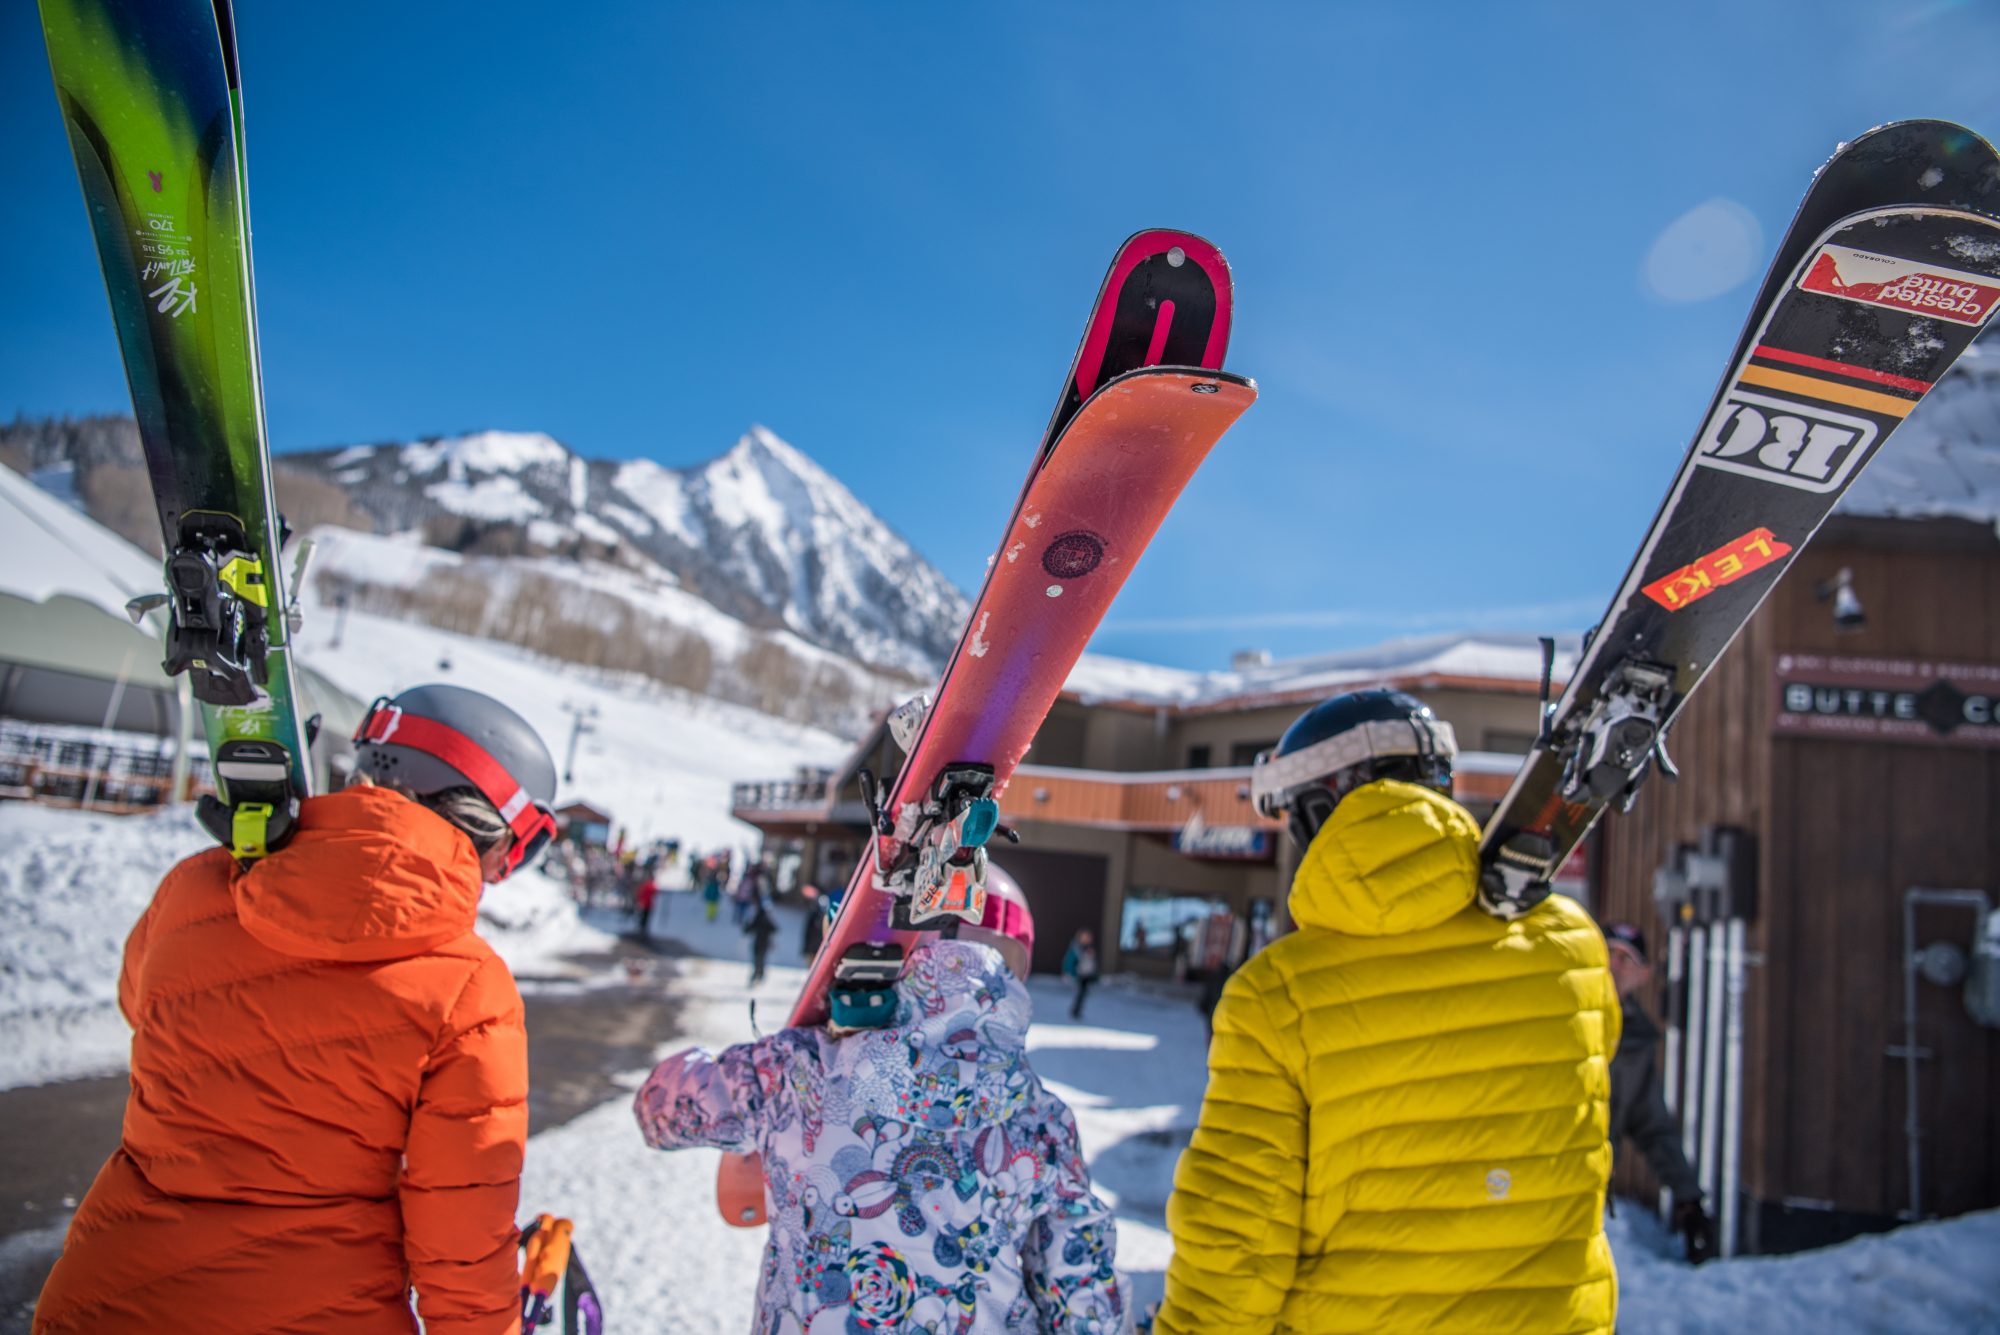 Skiers going to ski - with the Butte in the background. Photo: Trent Bona. Crested Butte Mountain Resort. Crested Butte Mountain Resort Announces Plans to Replace the Teocalli Lift for the 2019-20 Winter Season.